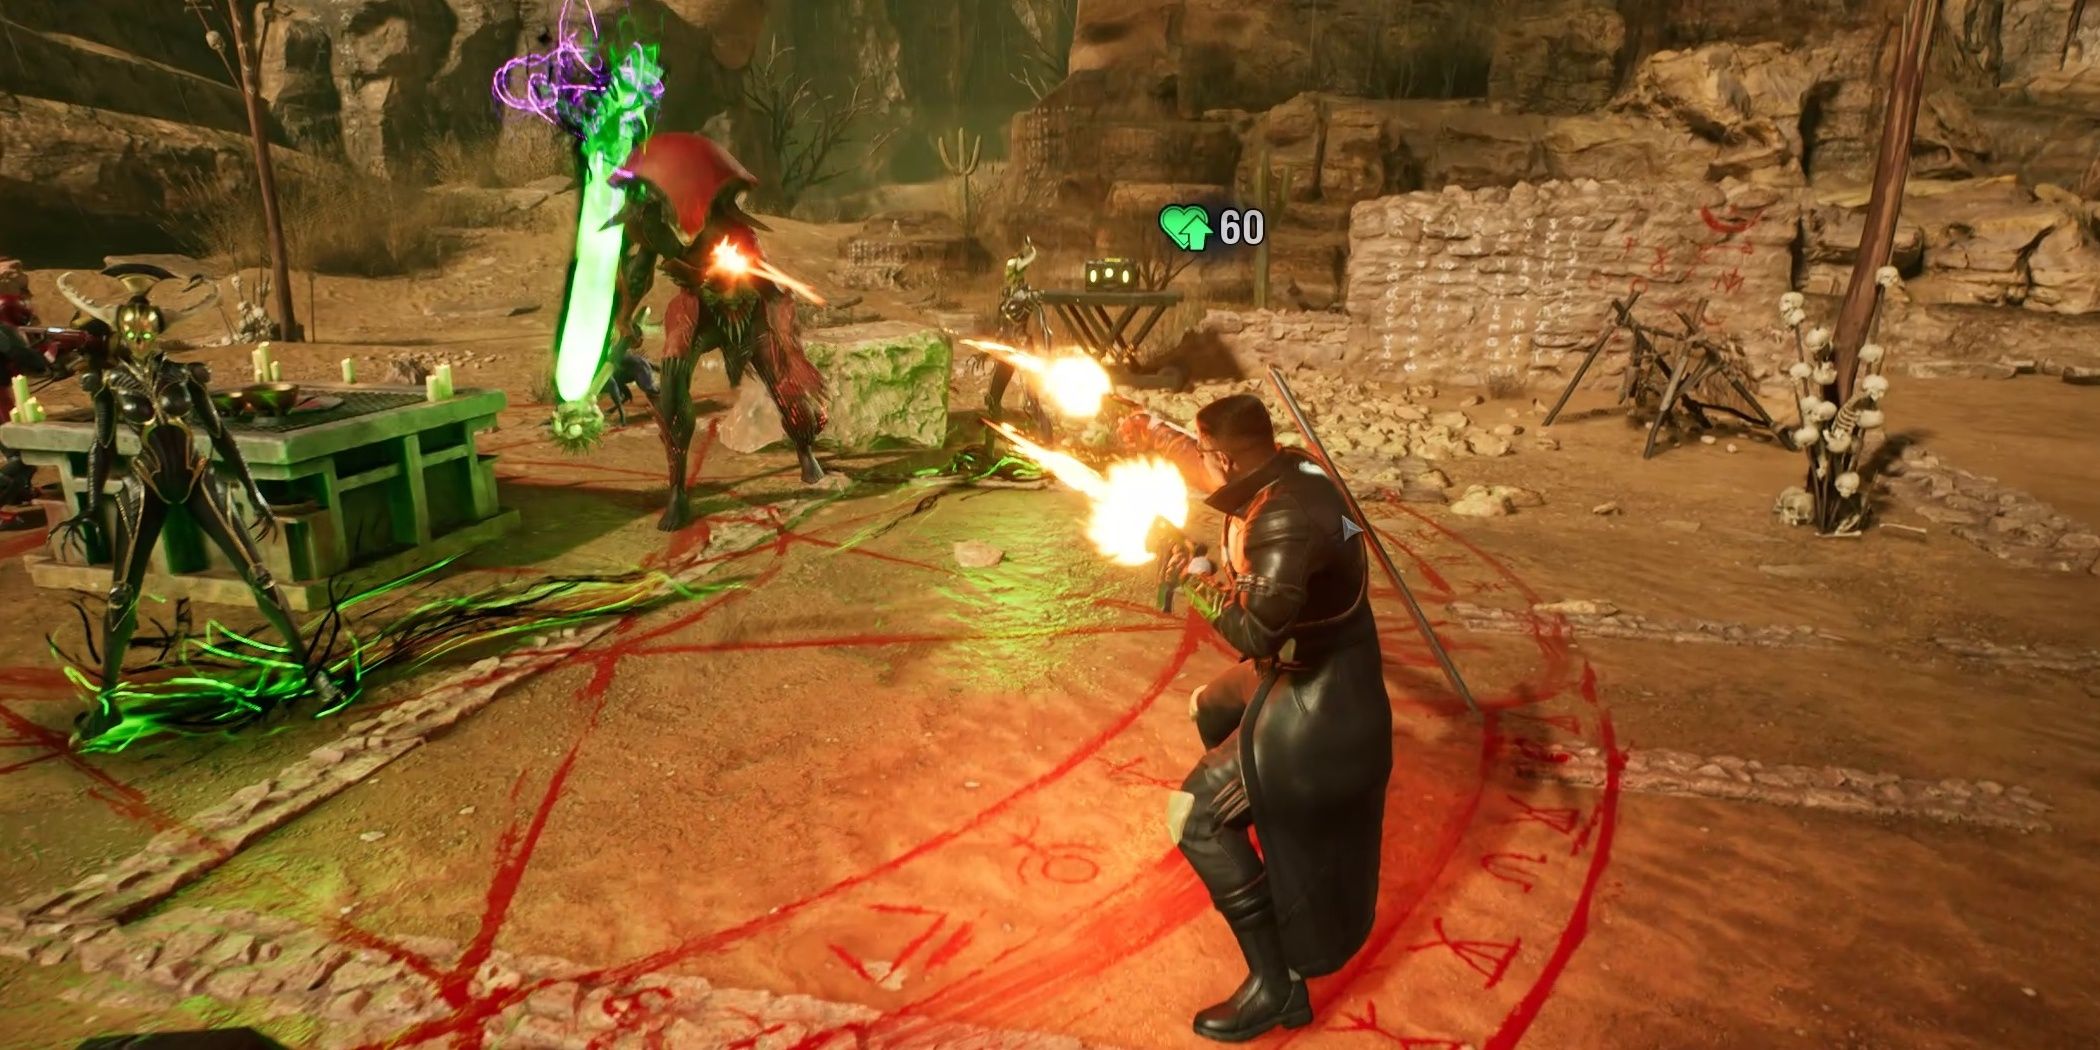 Blade uses Quick Strike on an enemy in Marvel's Midnight Suns